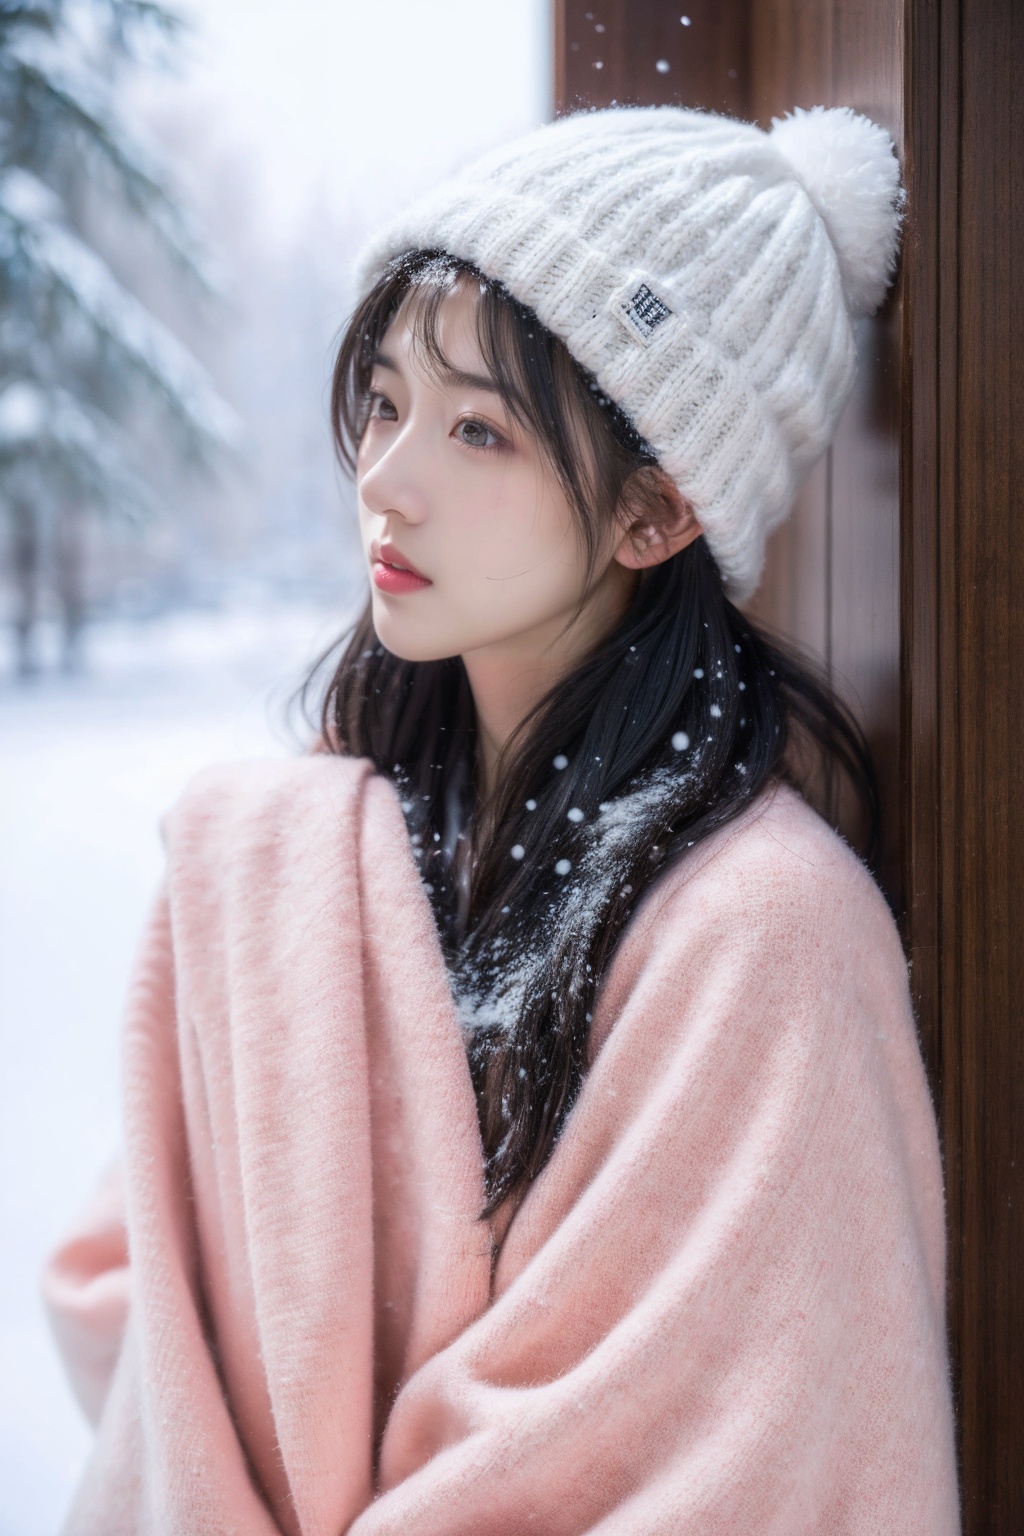  The girl in the plush hat, like a masterpiece of realism, is superior in quality, and the picture quality reaches the ultra-high resolution 16K realm. Imagine, it's snowing outside, she's dressed in pink, her long legs are bare, a apple green coat is draped around her body, and then a coat is covered, the smell of winter is blowing in her face. The picture is high-definition, the contrast between light and dark is prominent, the side light and diffuse reflection are interwoven, the collision light, the close-up moment is frozen, and the strong emotion is coming out. This is the charm of modernism, a picture, a thousand words, gripping.